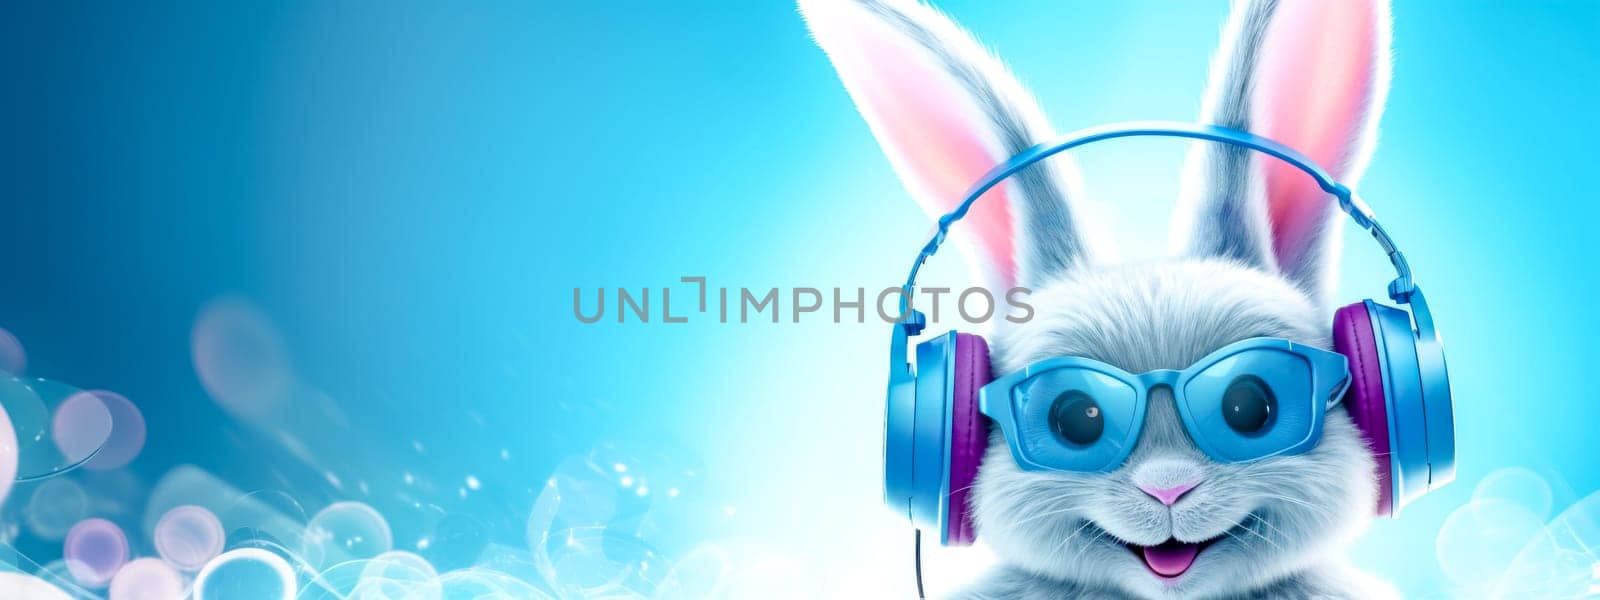 Stylish animated bunny character with headphones on a vibrant blue background